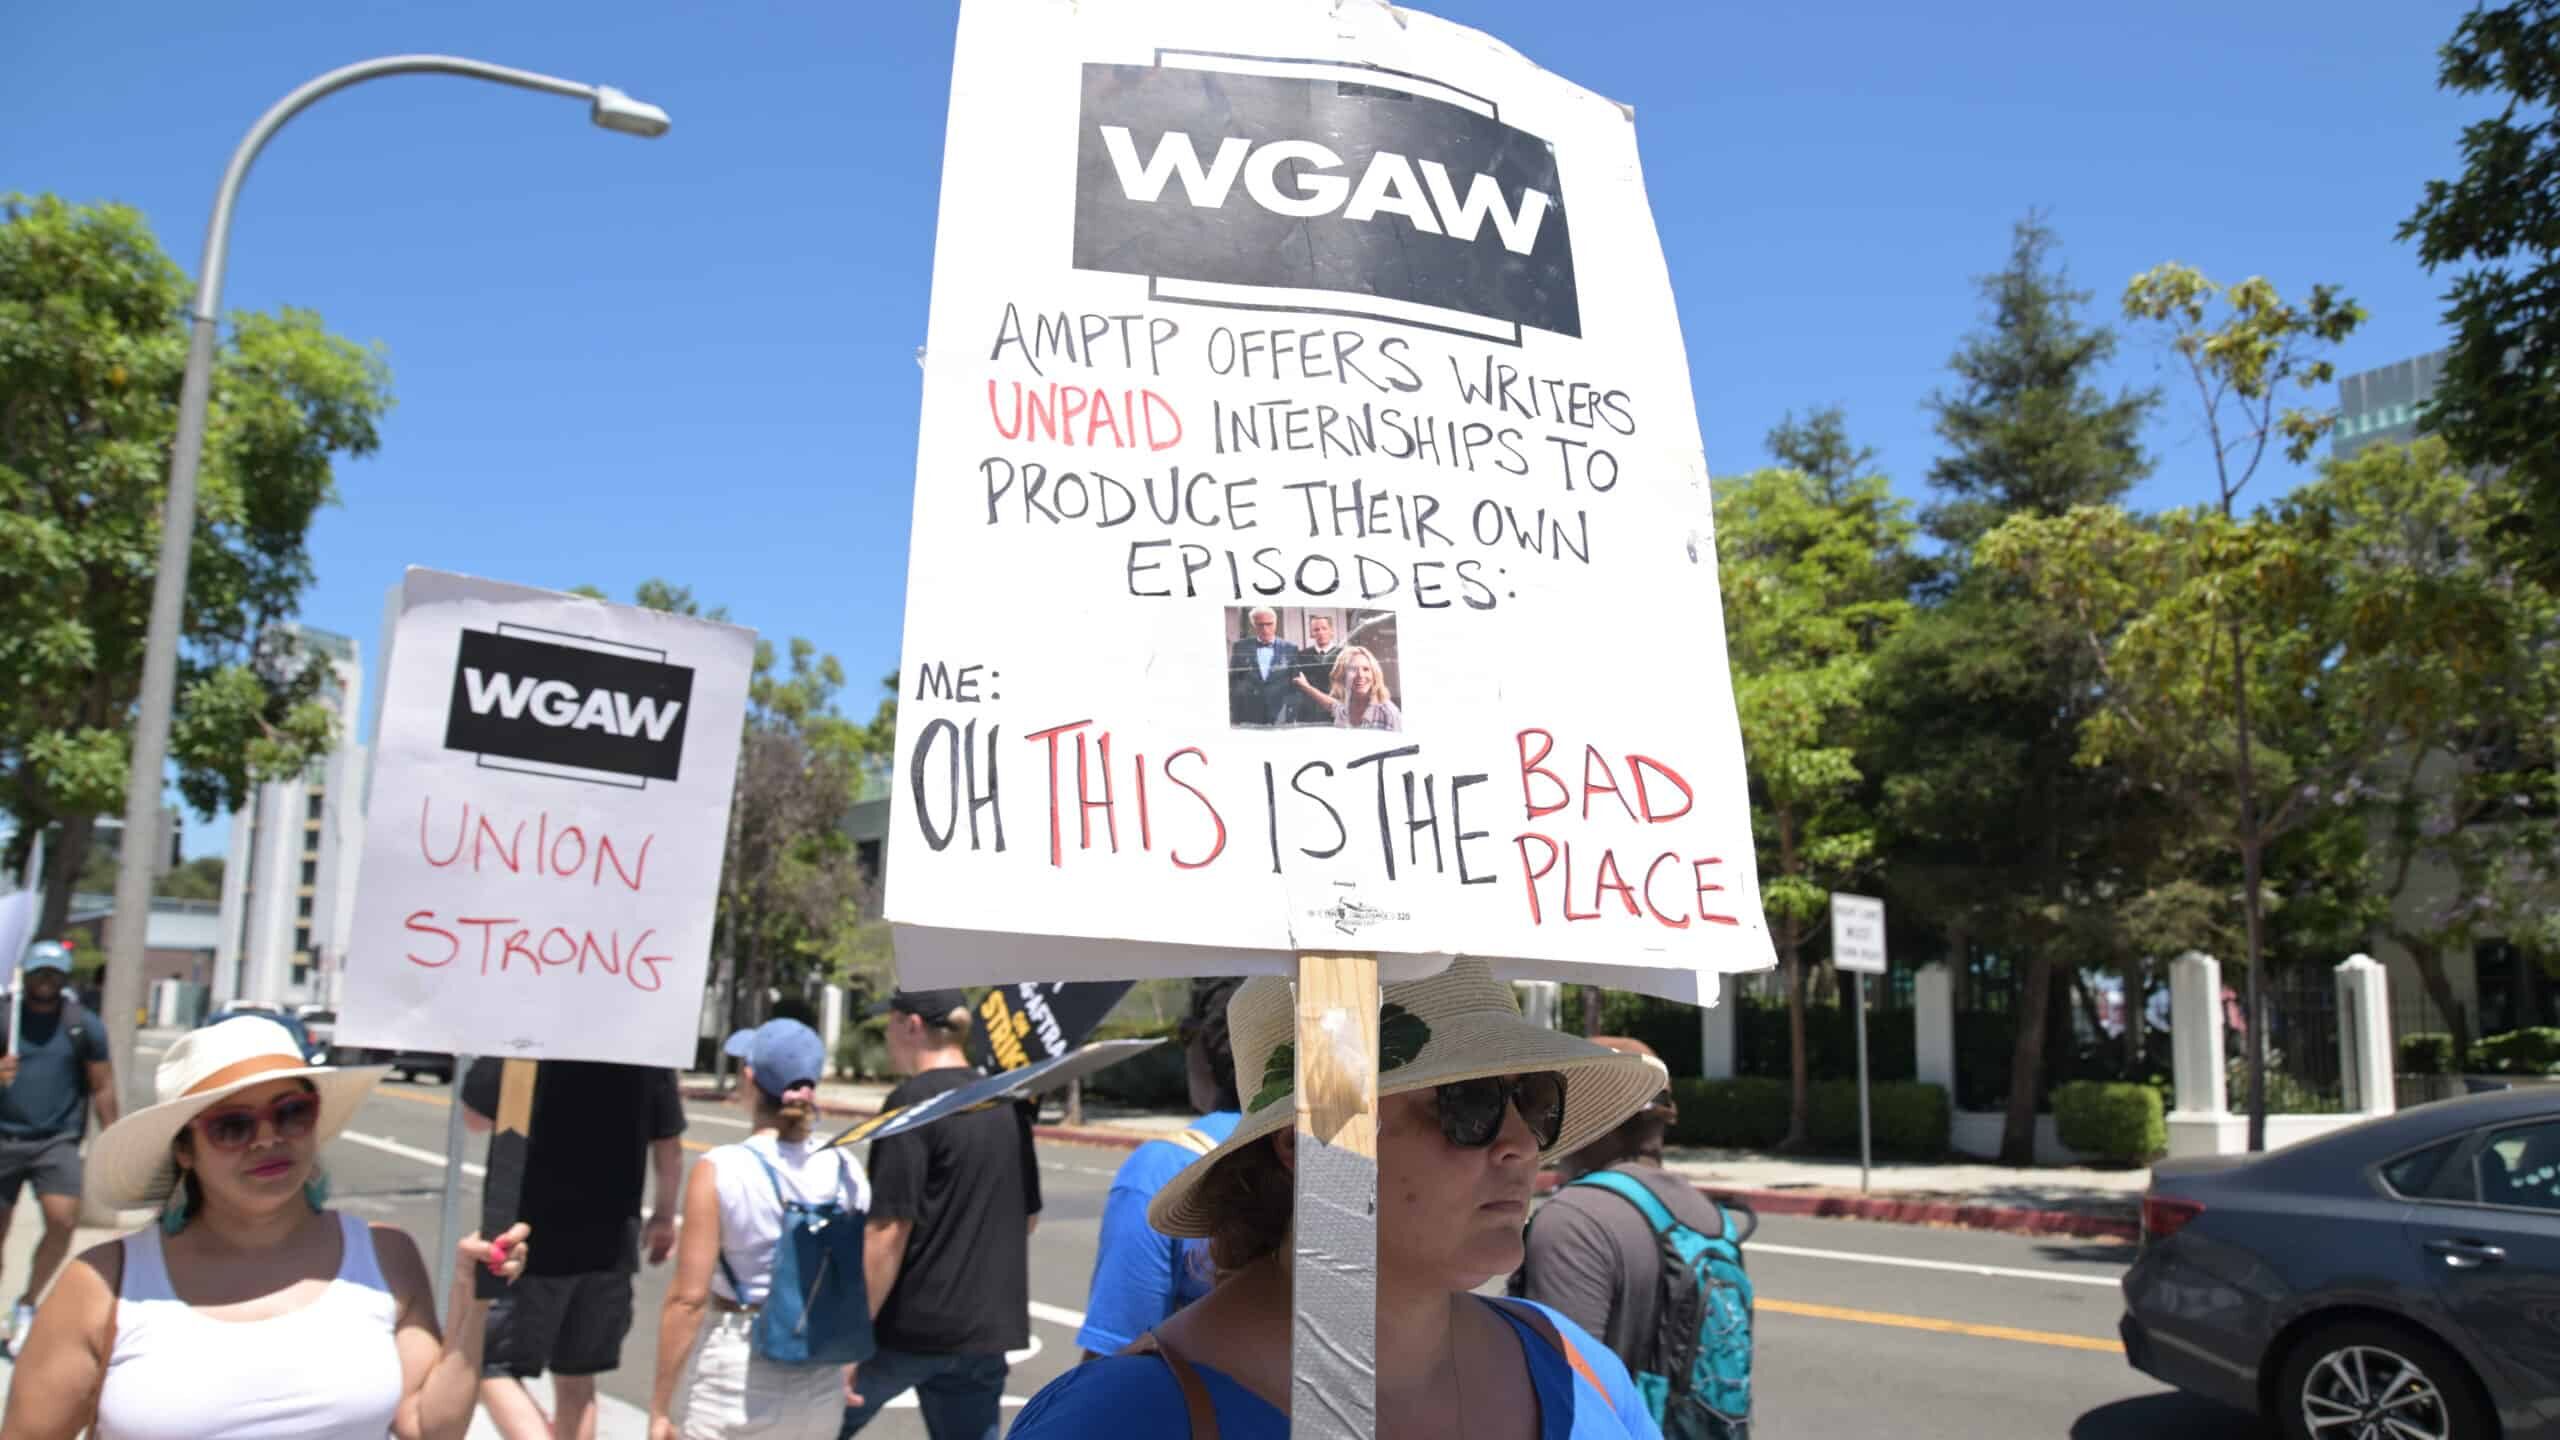 LOS ANGELES, CALIFORNIA - JULY 19: Members and supporters of SAG-AFTRA and WGA walk the picket line at Amazon Studios on July 19, 2023 in Culver City, California. Members of SAG-AFTRA, Hollywood's largest union which represents actors and other media professionals, have joined striking WGA (Writers Guild of America) workers in the first joint walkout against the studios since 1960. The strike could shut down Hollywood productions completely with writers in the third month of their strike against the Hollywood studios.